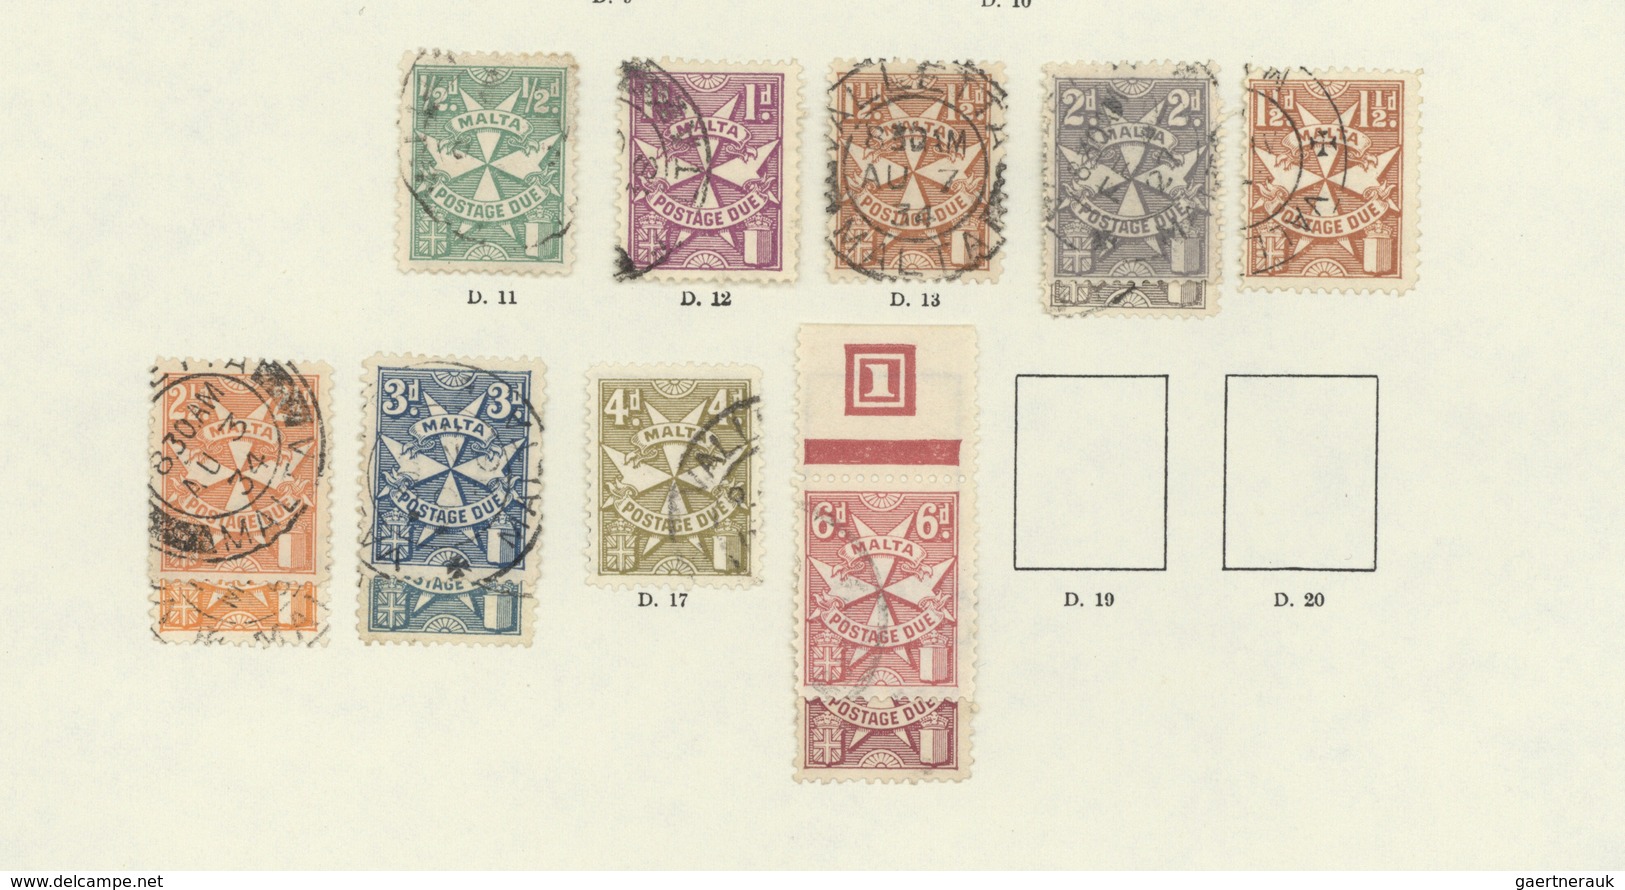 Malta: 1863-1937, Collection of about 160 stamps, most of them mint, some used, from the early QV ½d